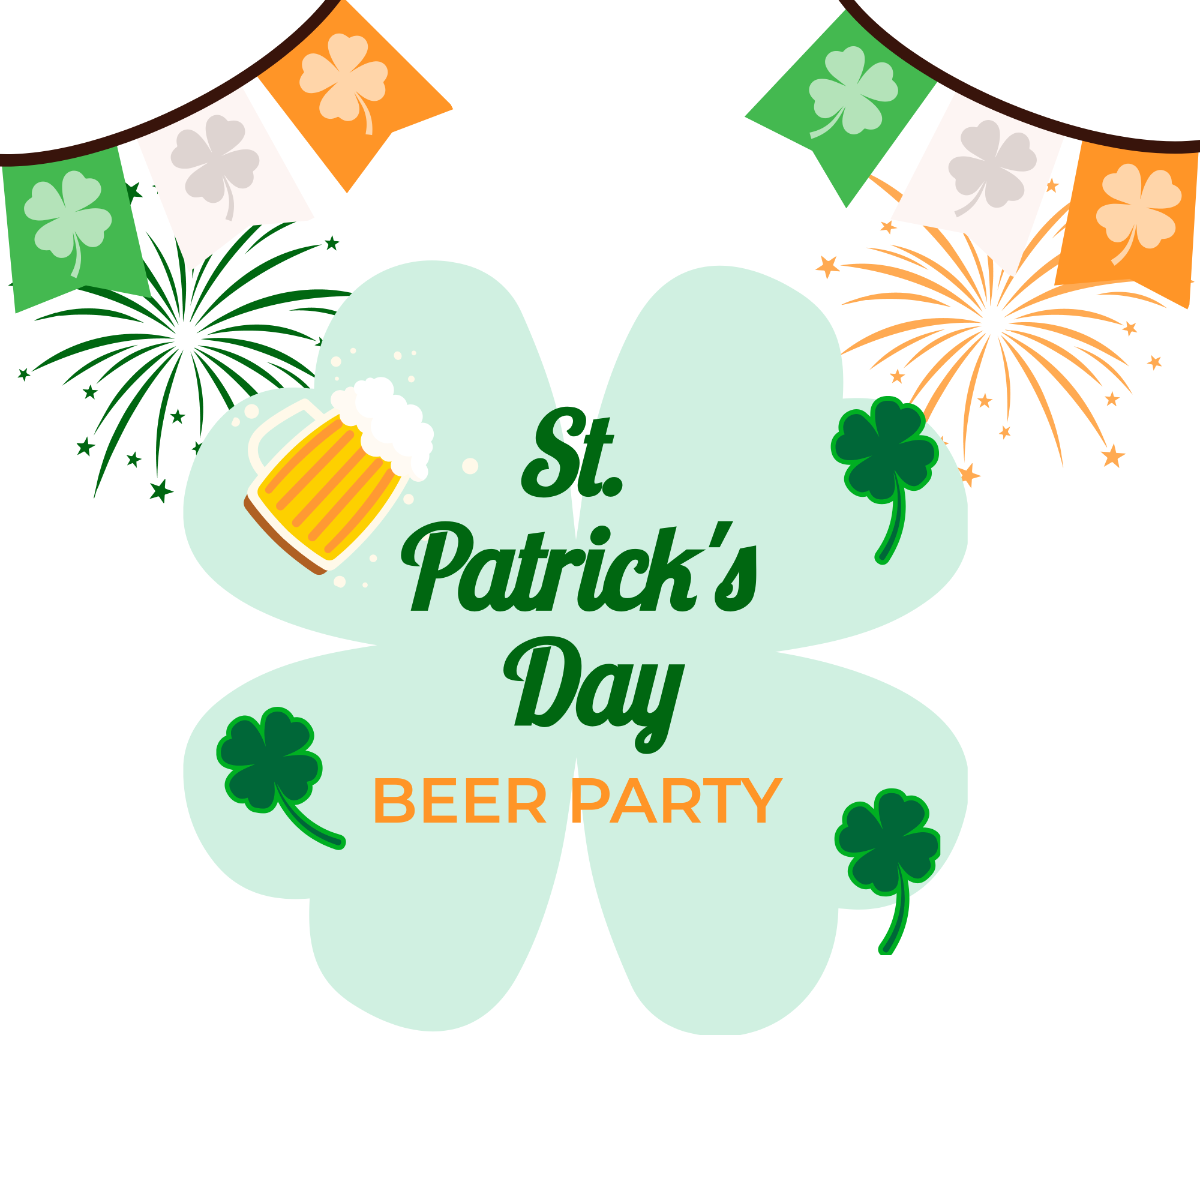 St. Patrick's Day Party Vector Template